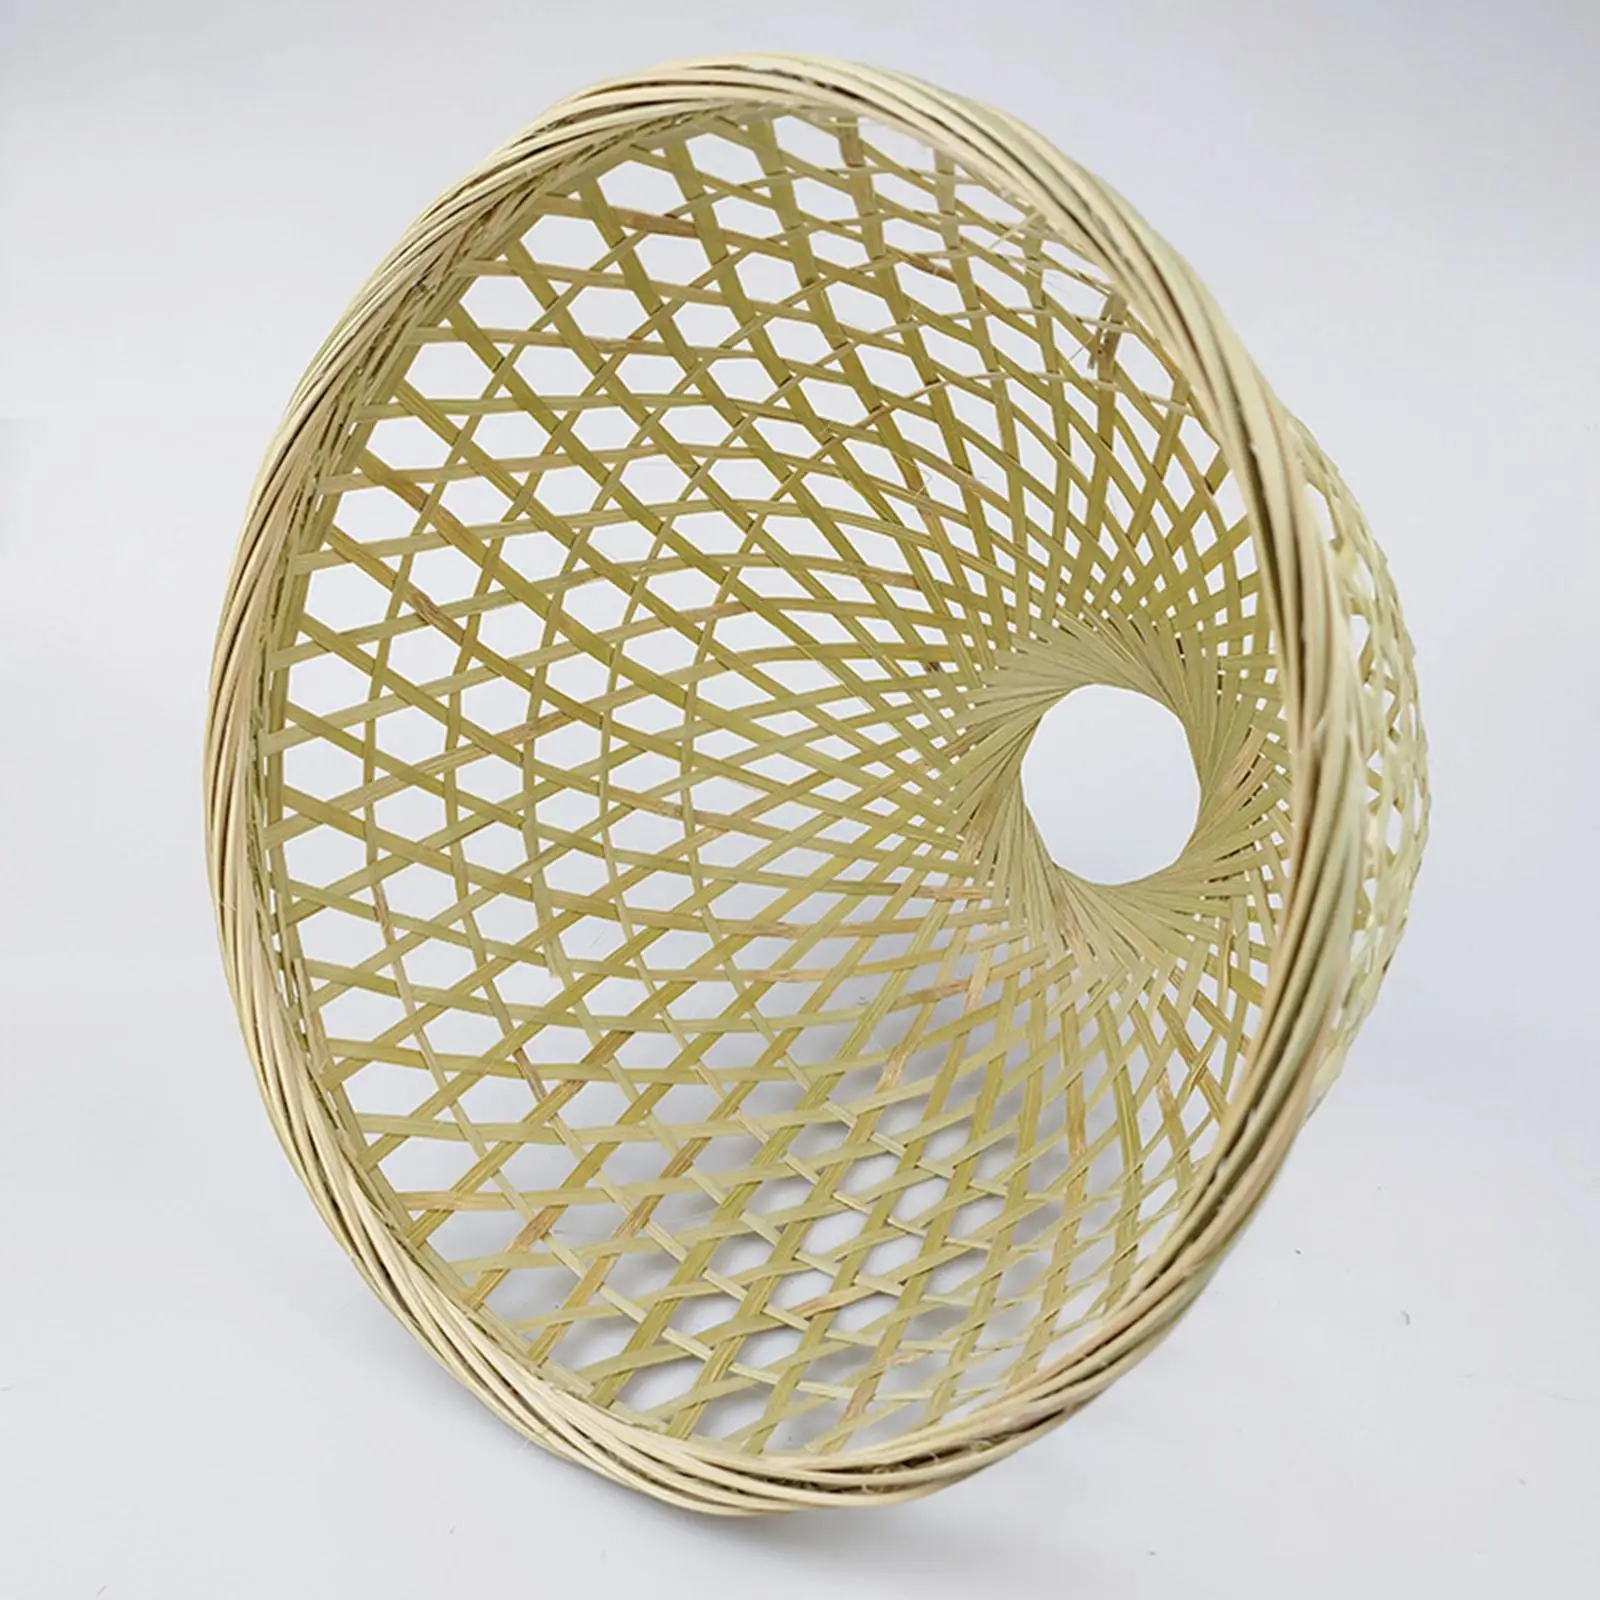 Natural Bamboo Lamp Shade Hanging Light Fixture Vintage Decoration Simple Minimalist Round Shaped Basket for Kitchen Island Cafe